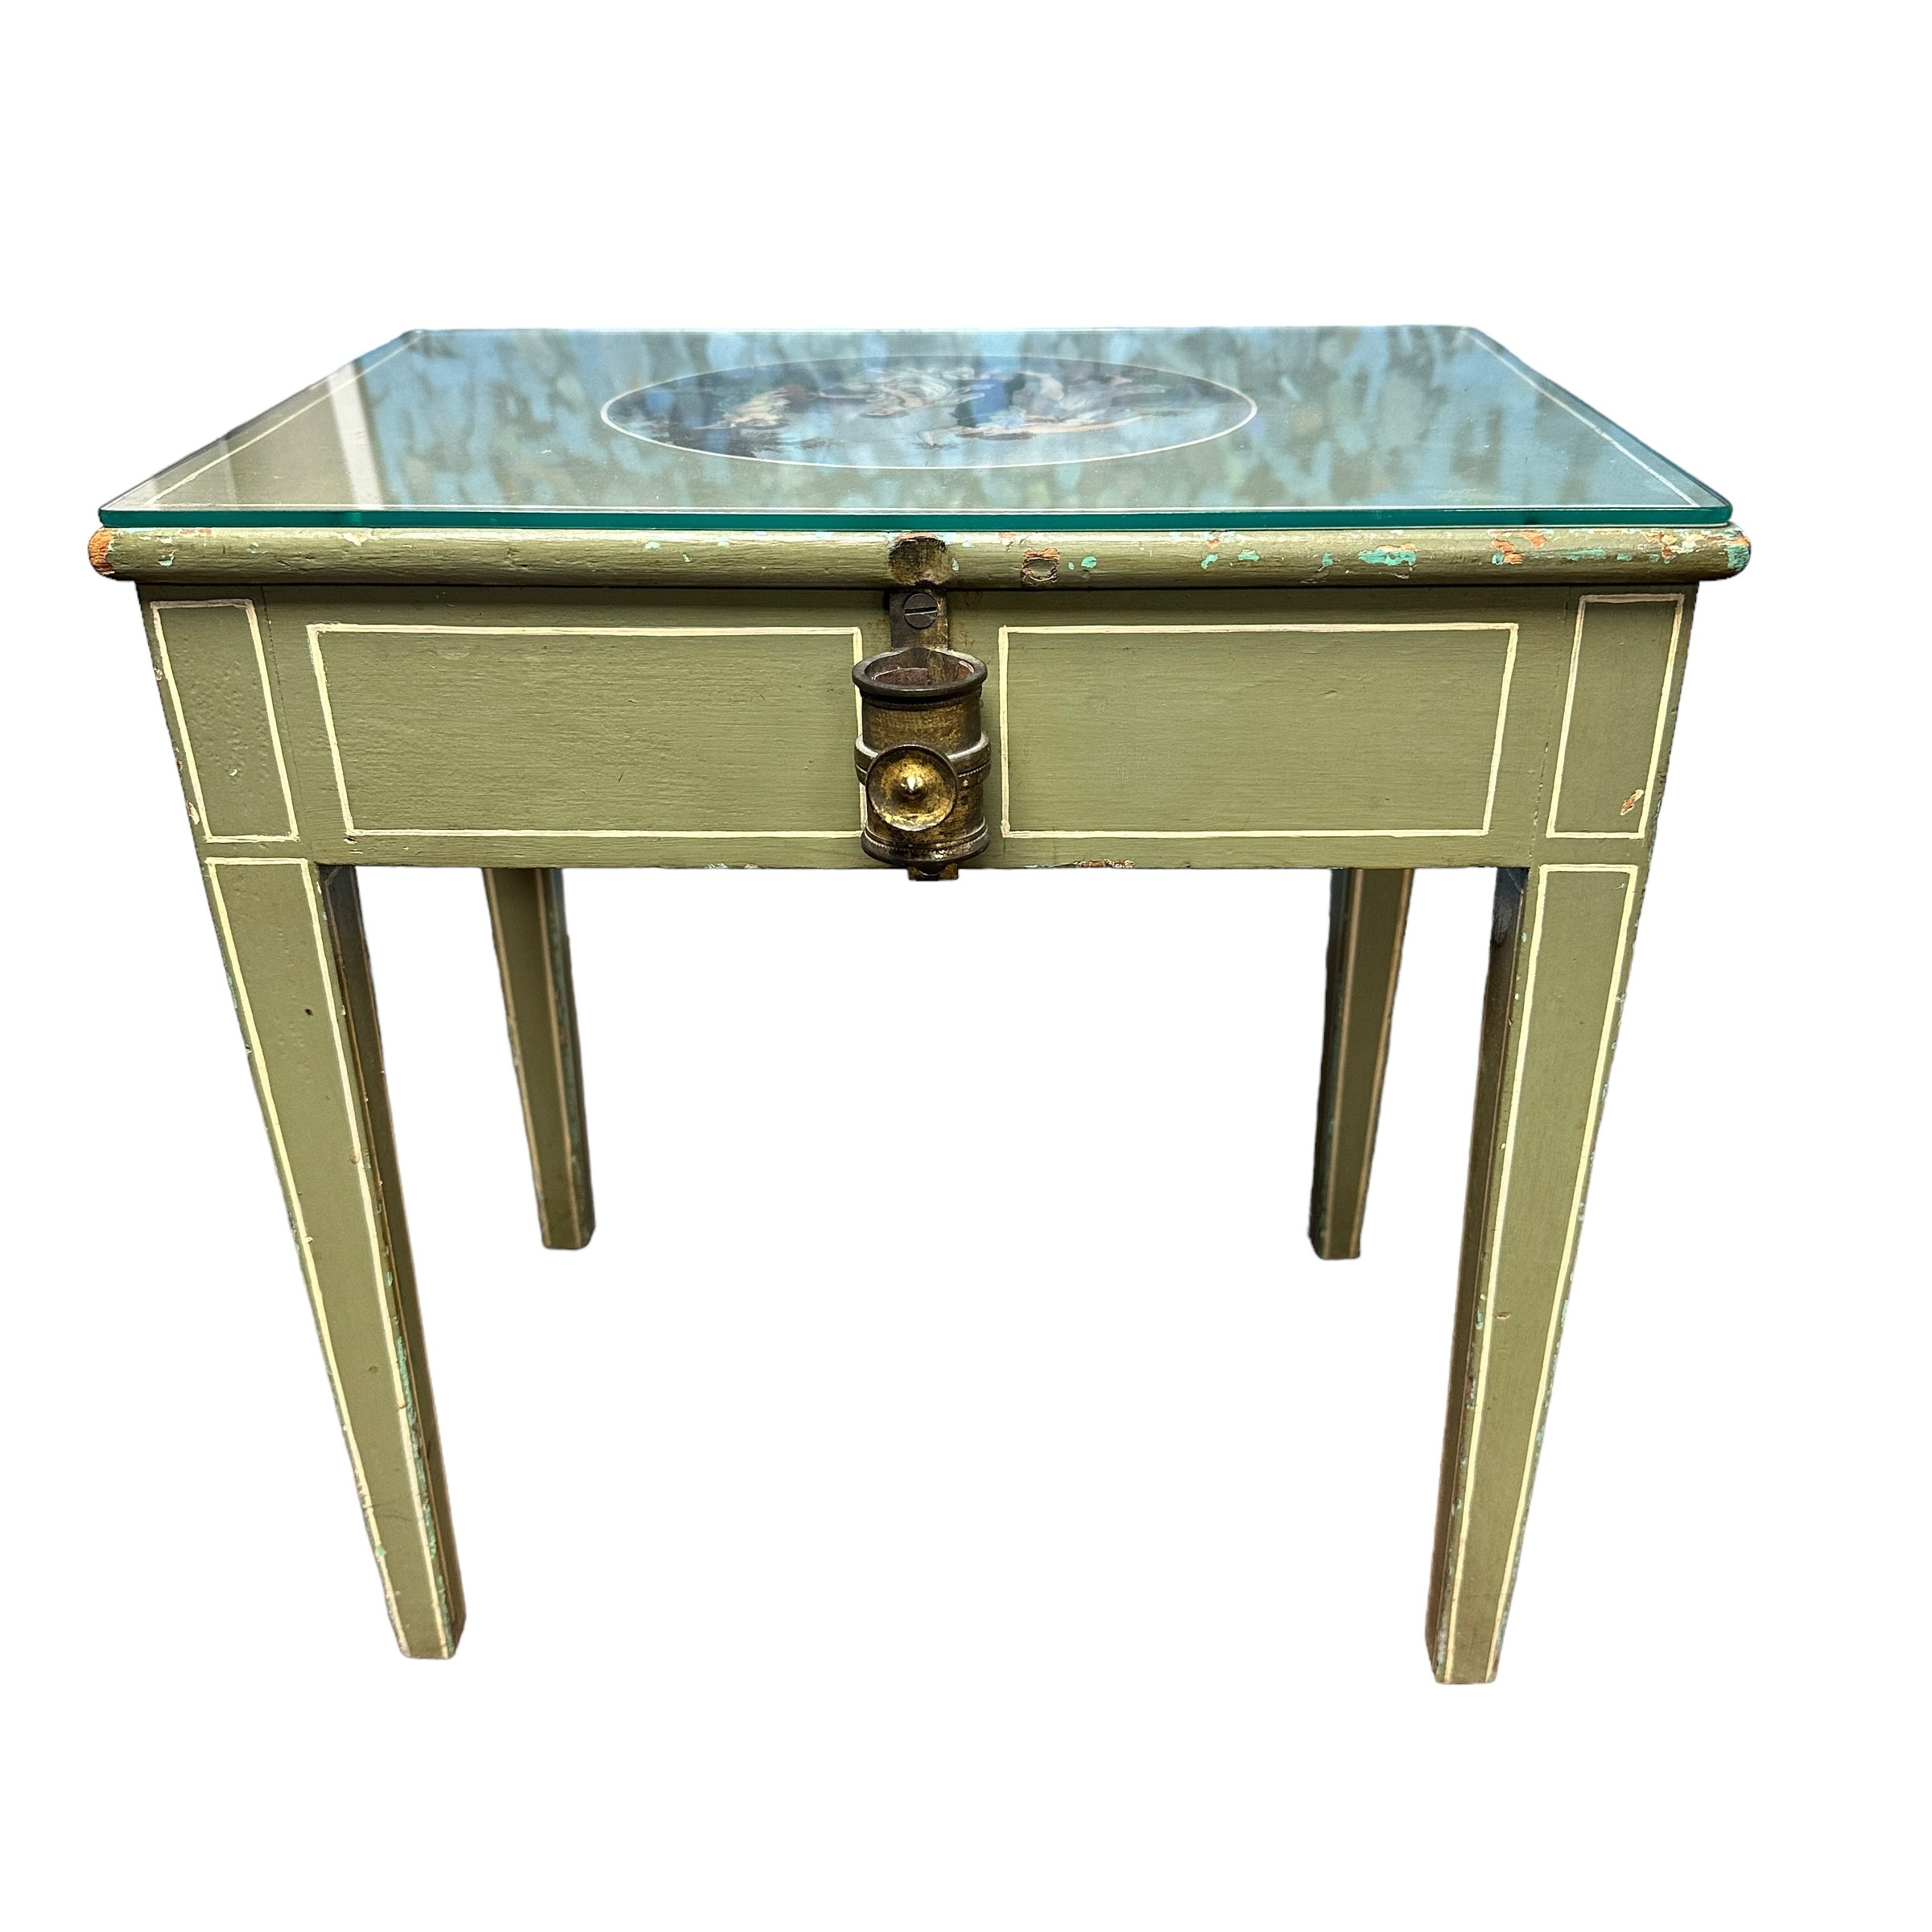 Early 19th Century painted sewing table, formerly with pole screen. 40 x 28 x 40cm. - Image 4 of 5